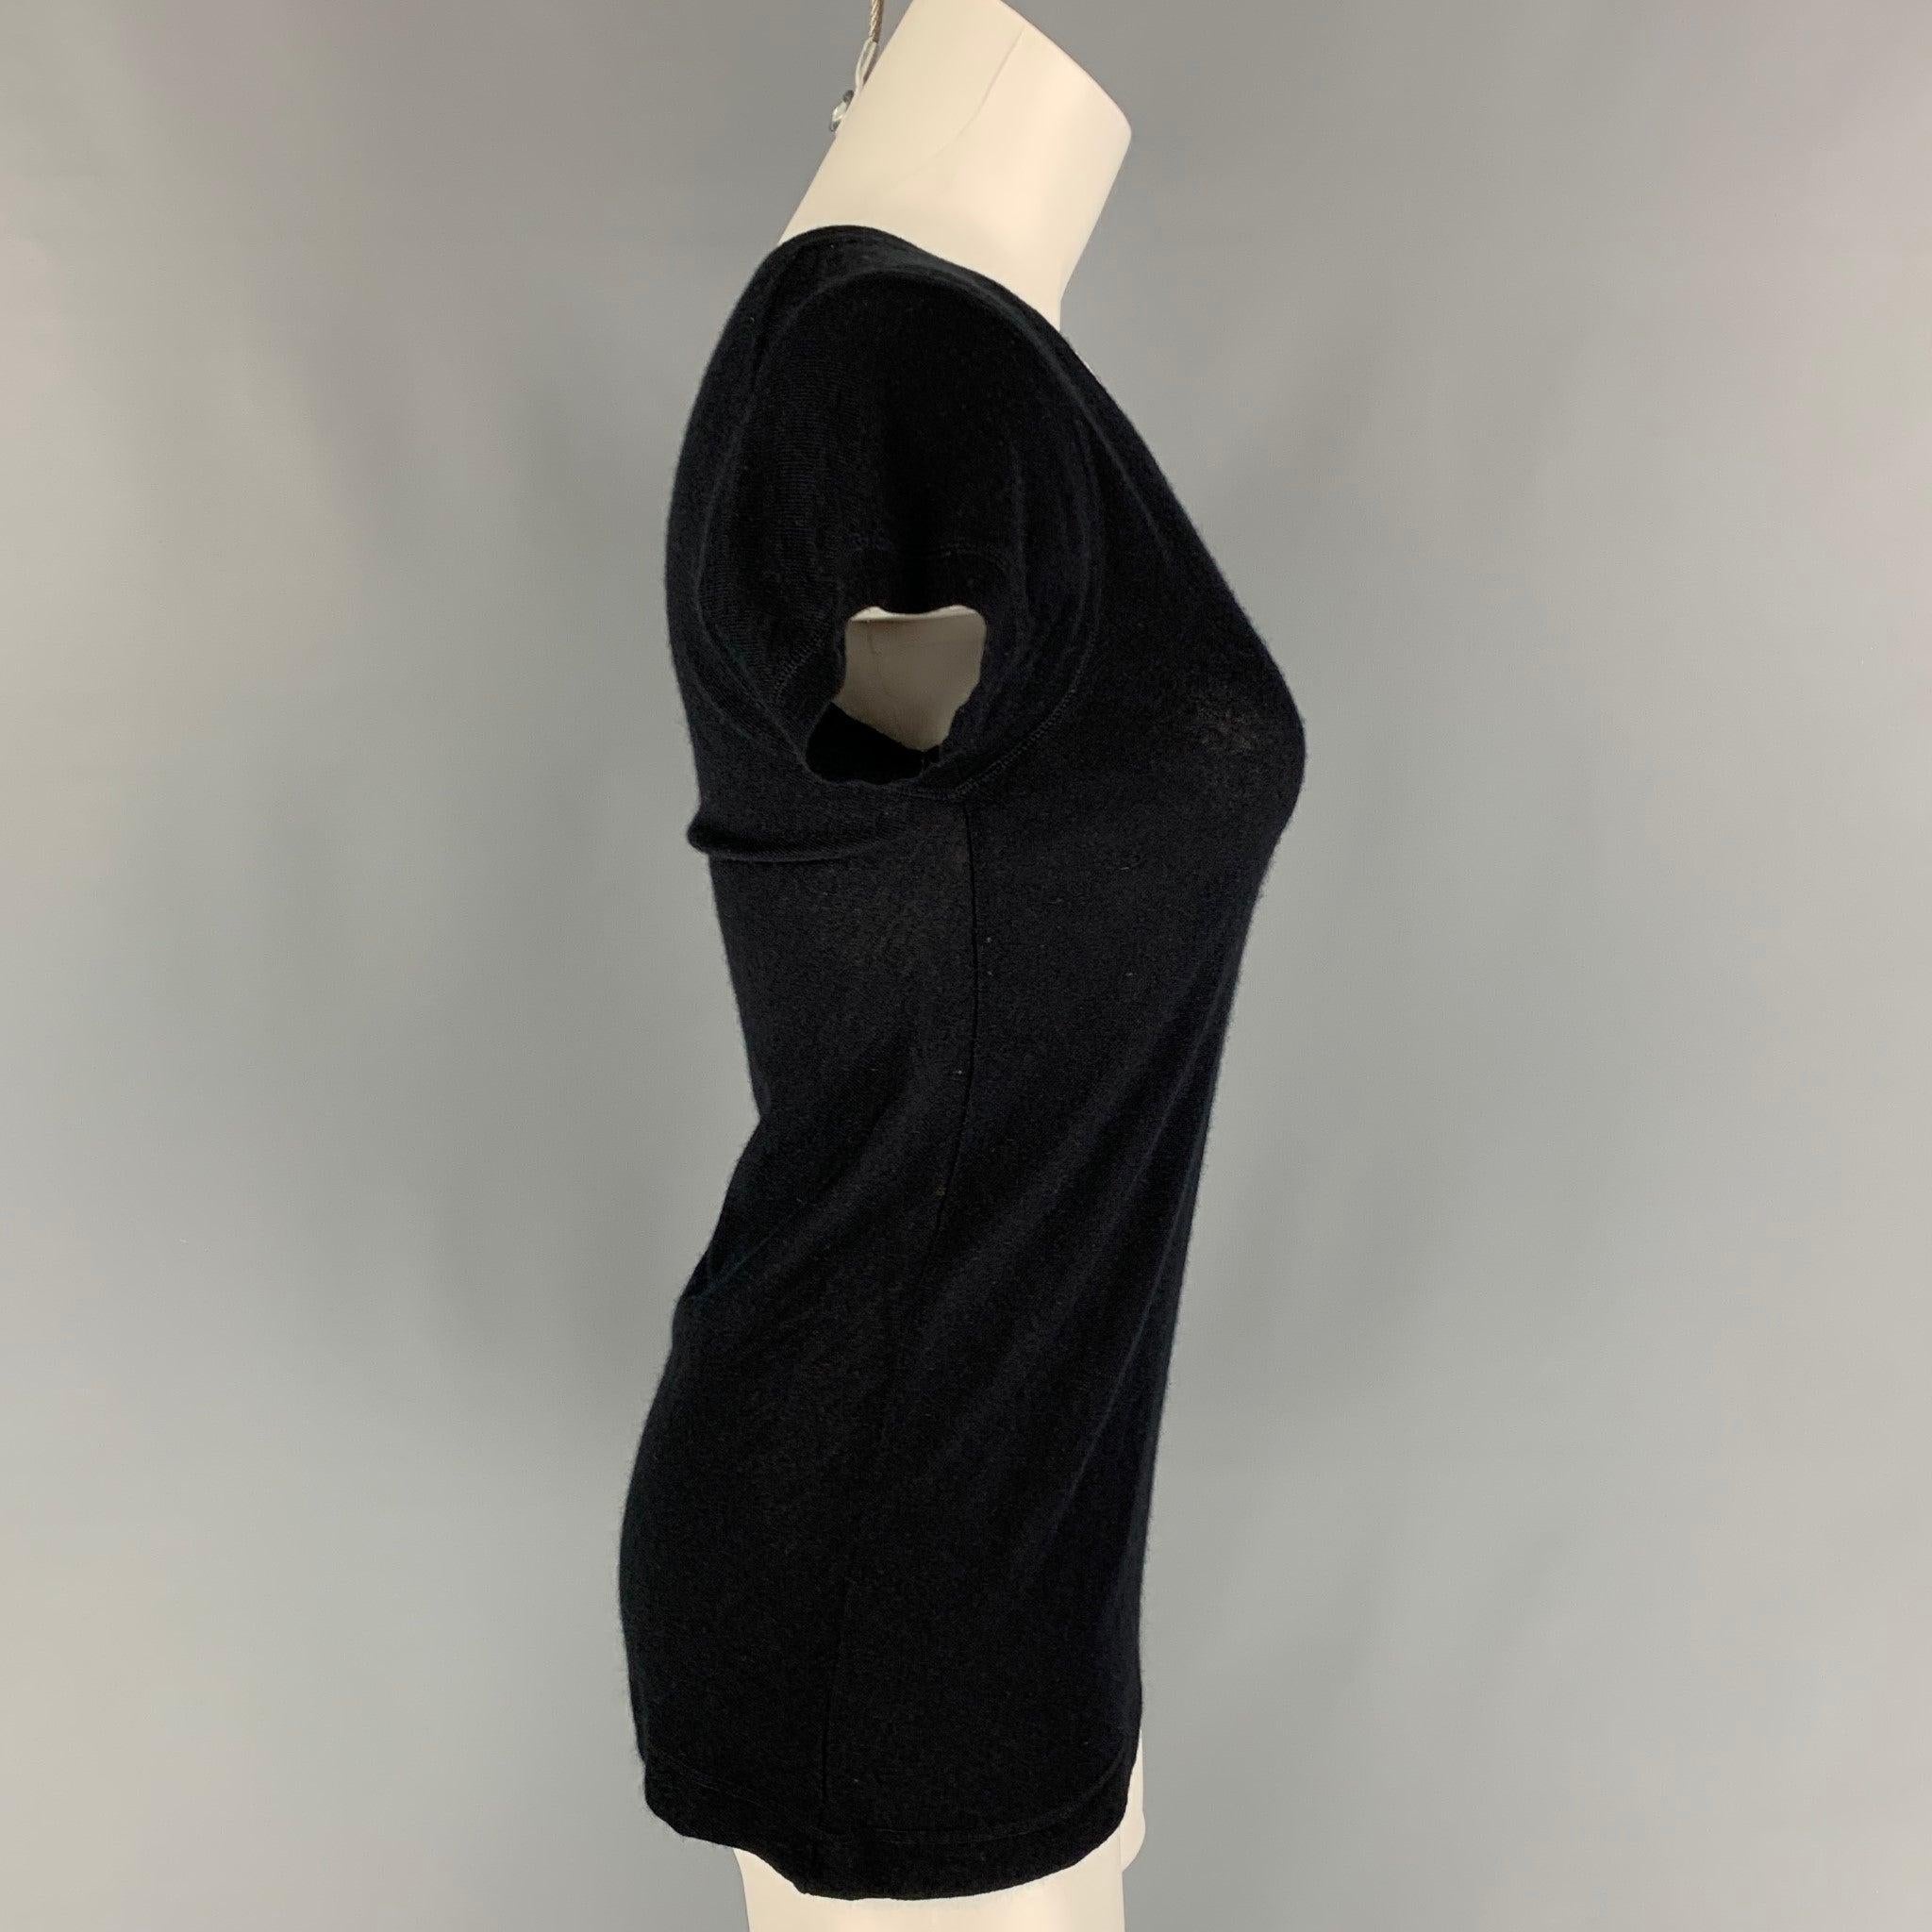 DONNA KARAN casual top comes in a black cashmere / silk featuring a crew-neck.
Very Good
Pre-Owned Condition. 

Marked:   M 

Measurements: 
 
Shoulder: 14.5 inches  Bust: 28 inches  Sleeve: 5 inches  Length: 24.5 inches 
  
  
 
Reference: